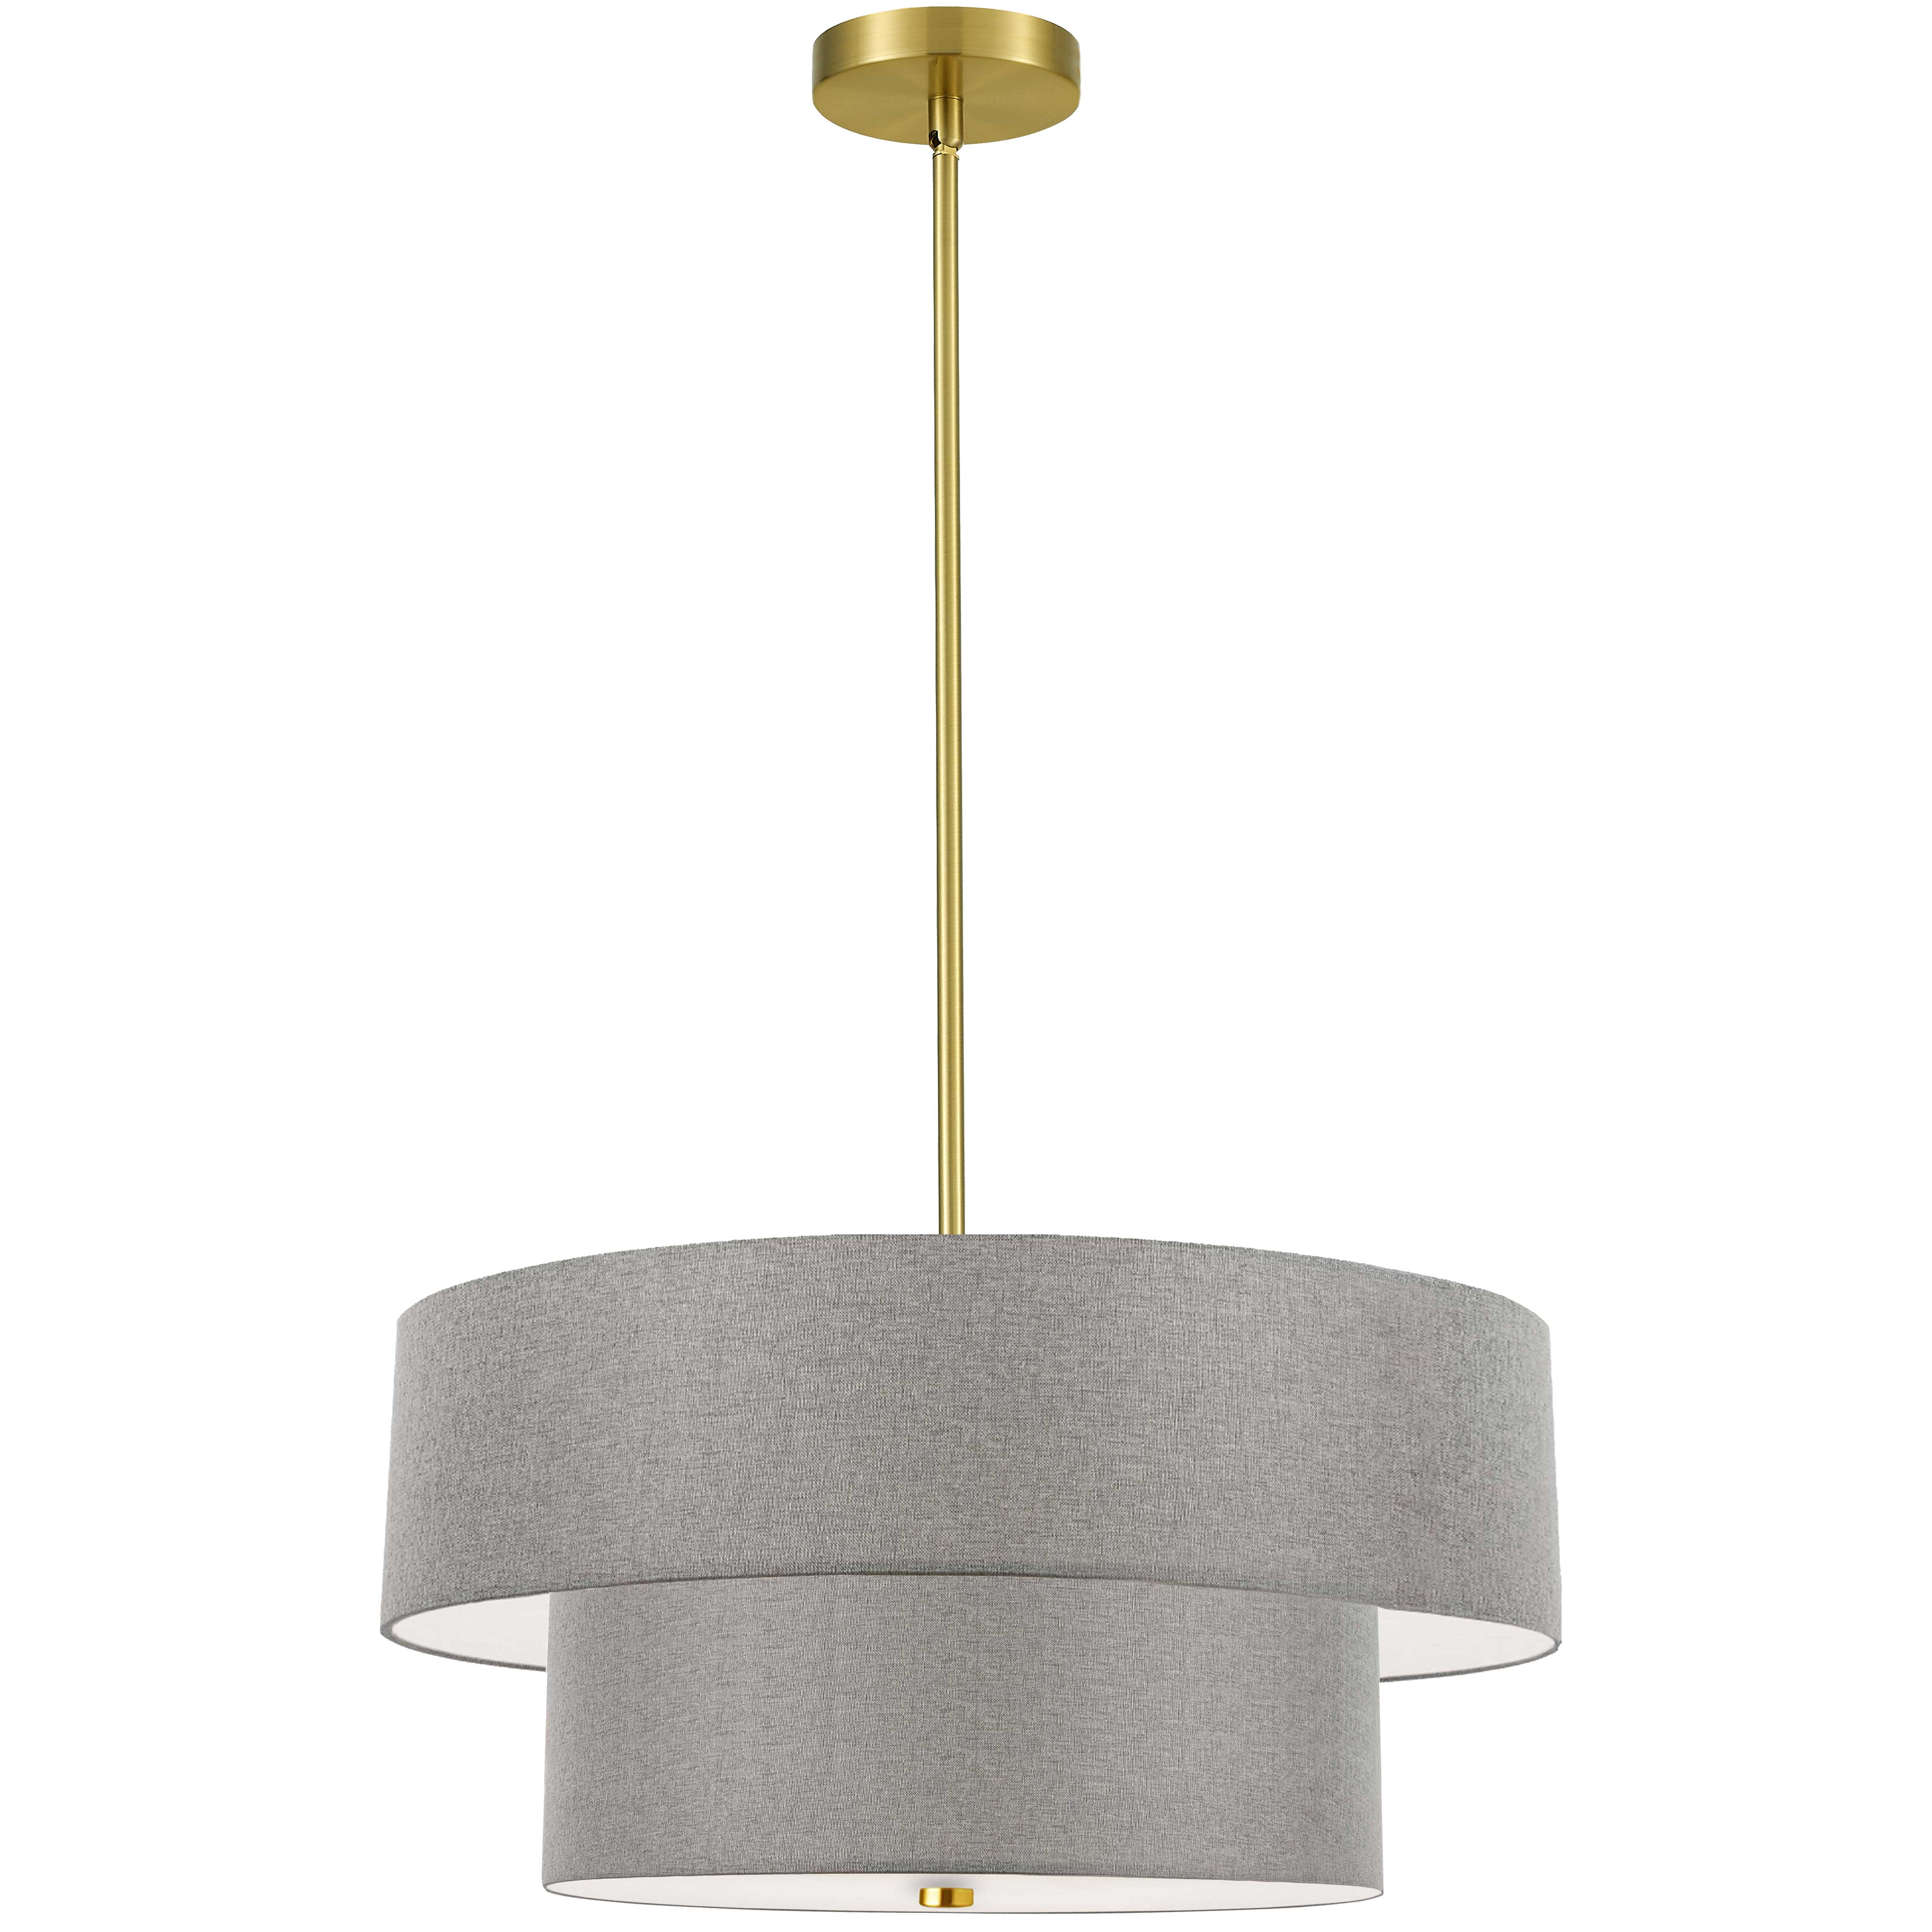 4LT Incand 2 Tier Pendant, AGB w/ GRY Shade